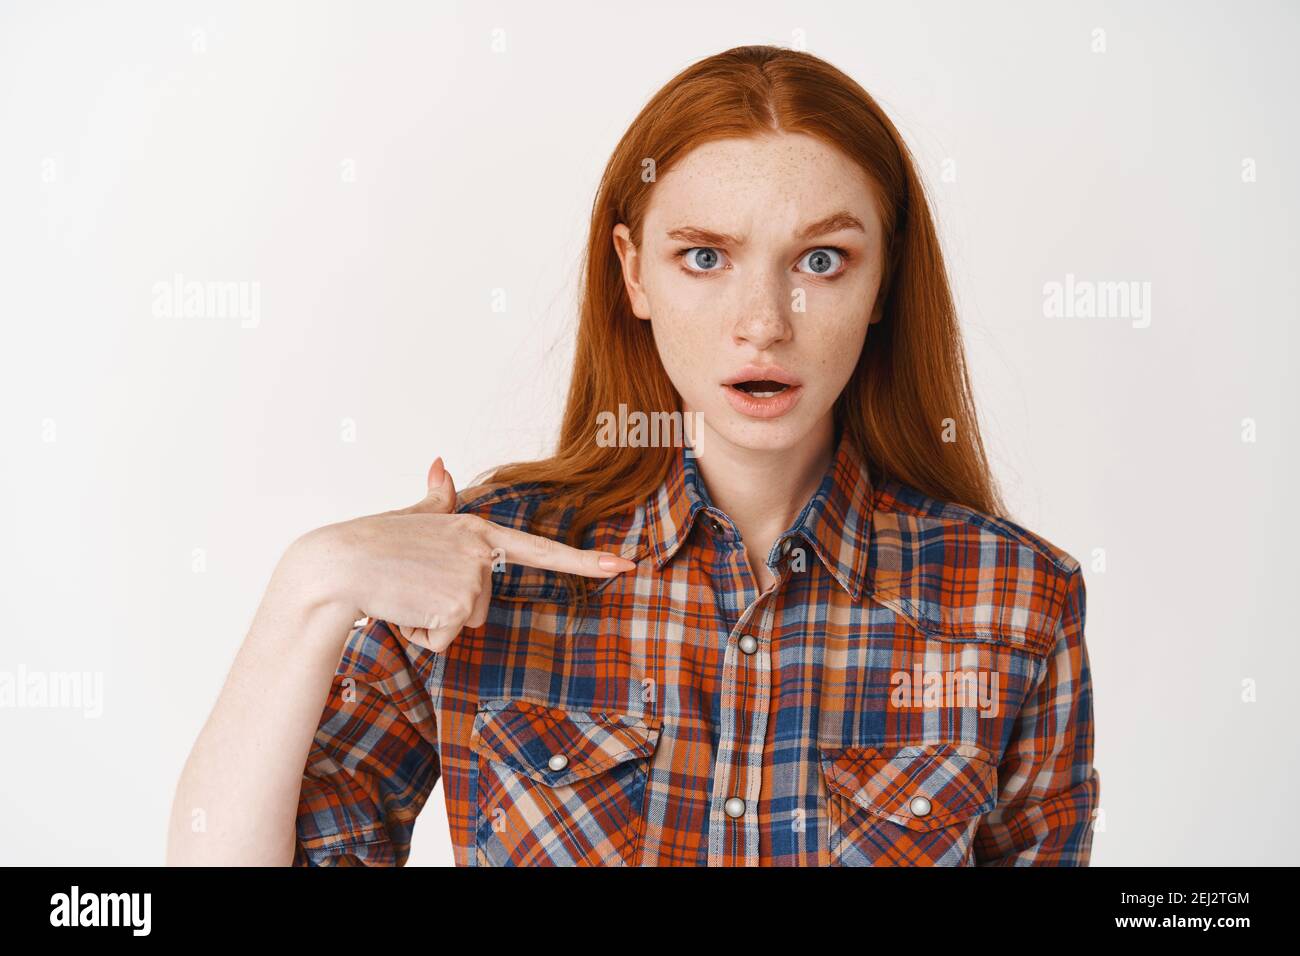 Close-up of redhead girl with pale skin looking confused, pointing at herself puzzled, standing on white background Stock Photo